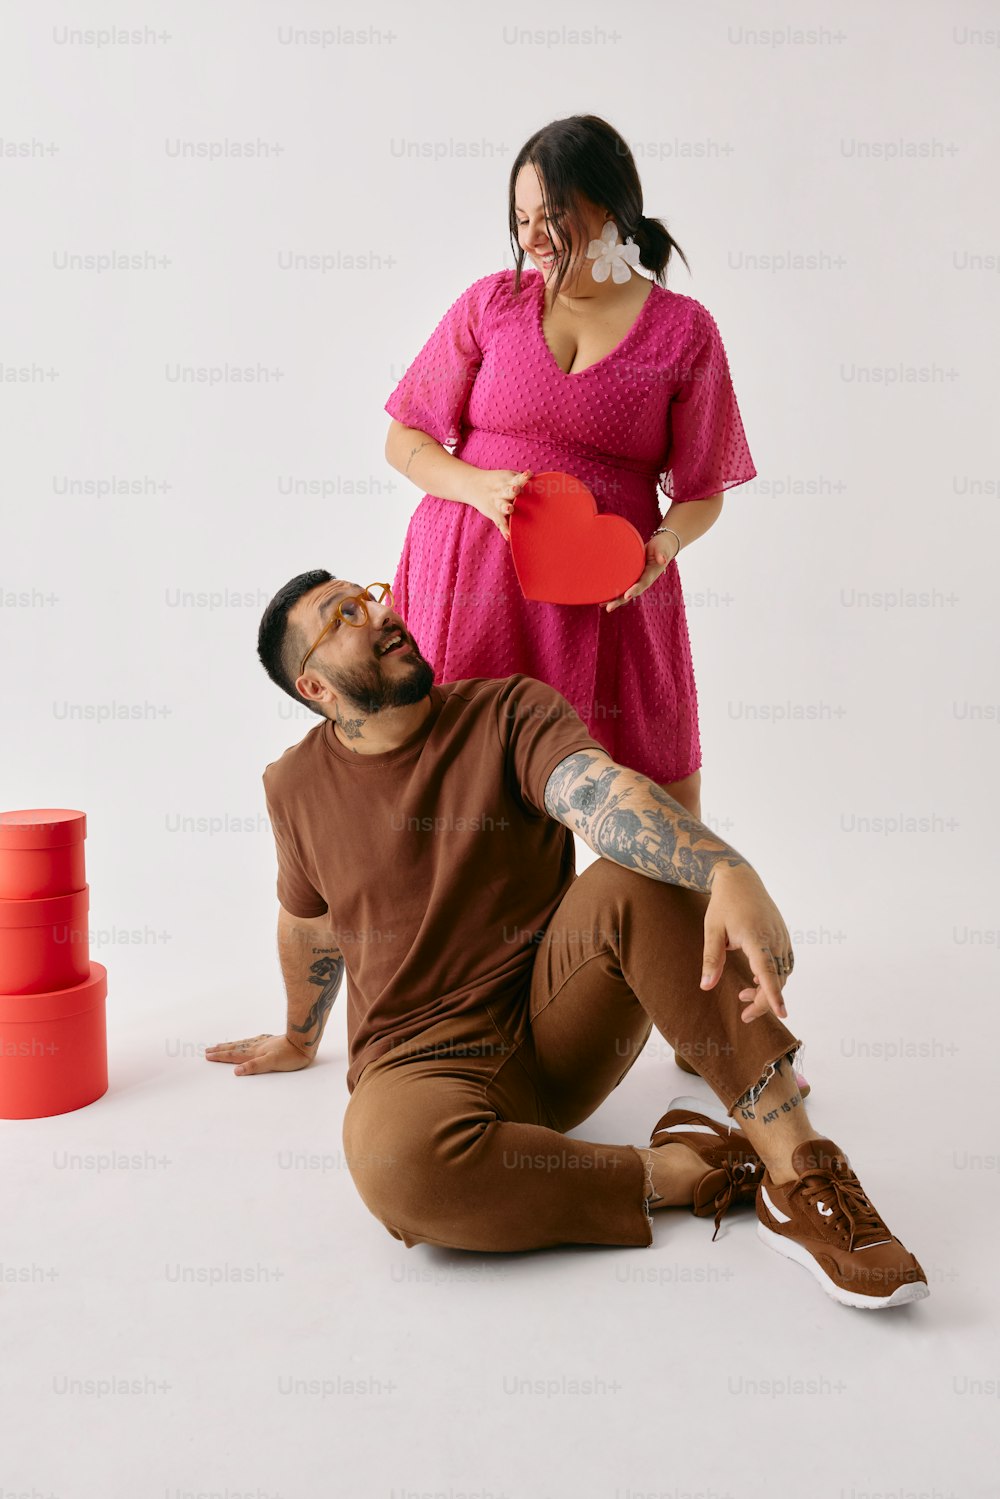 a man holding a red frisbee next to a woman